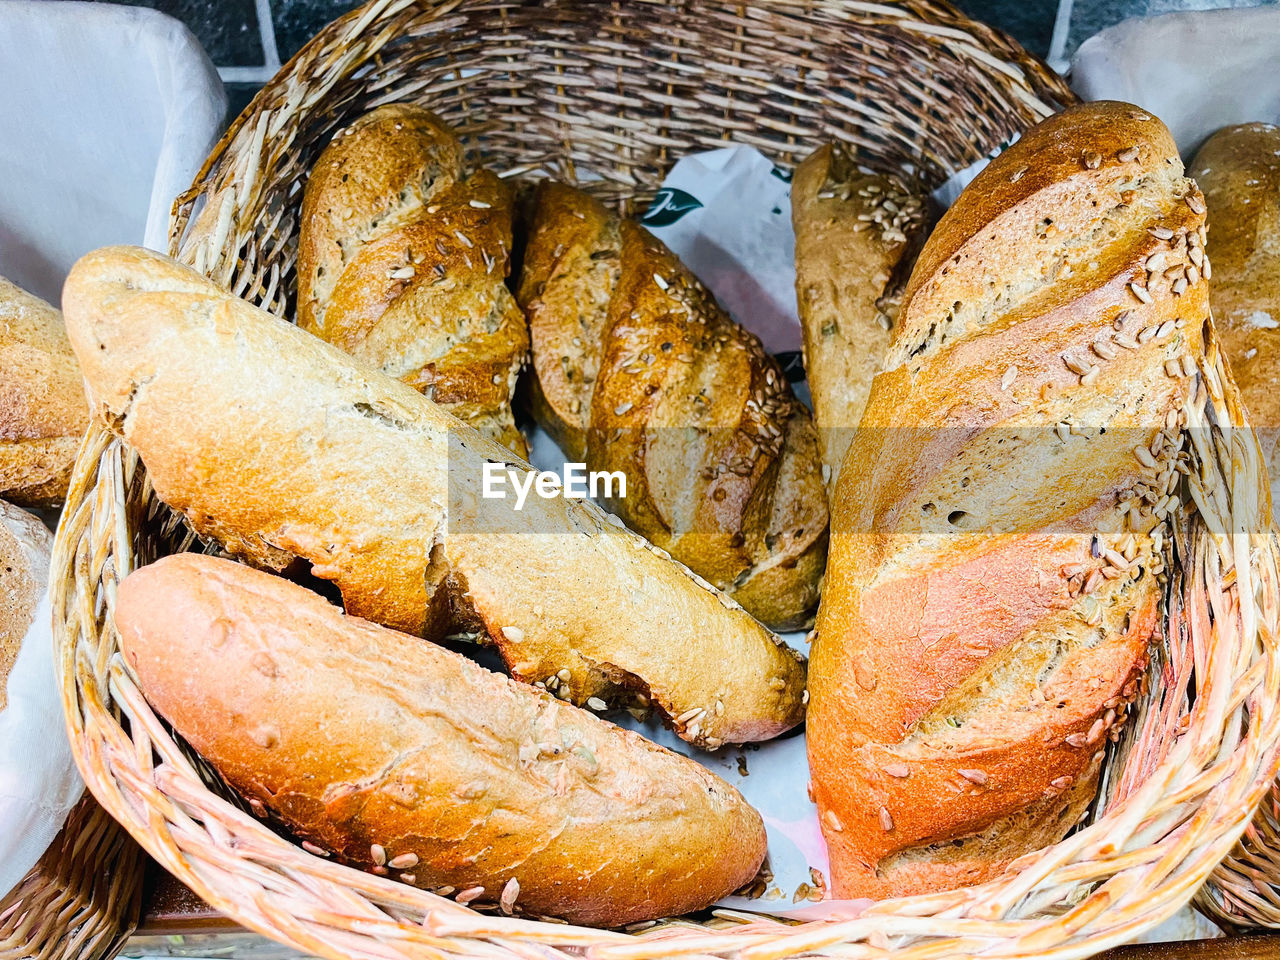 Traditional bread in baskets. food concept. copy space